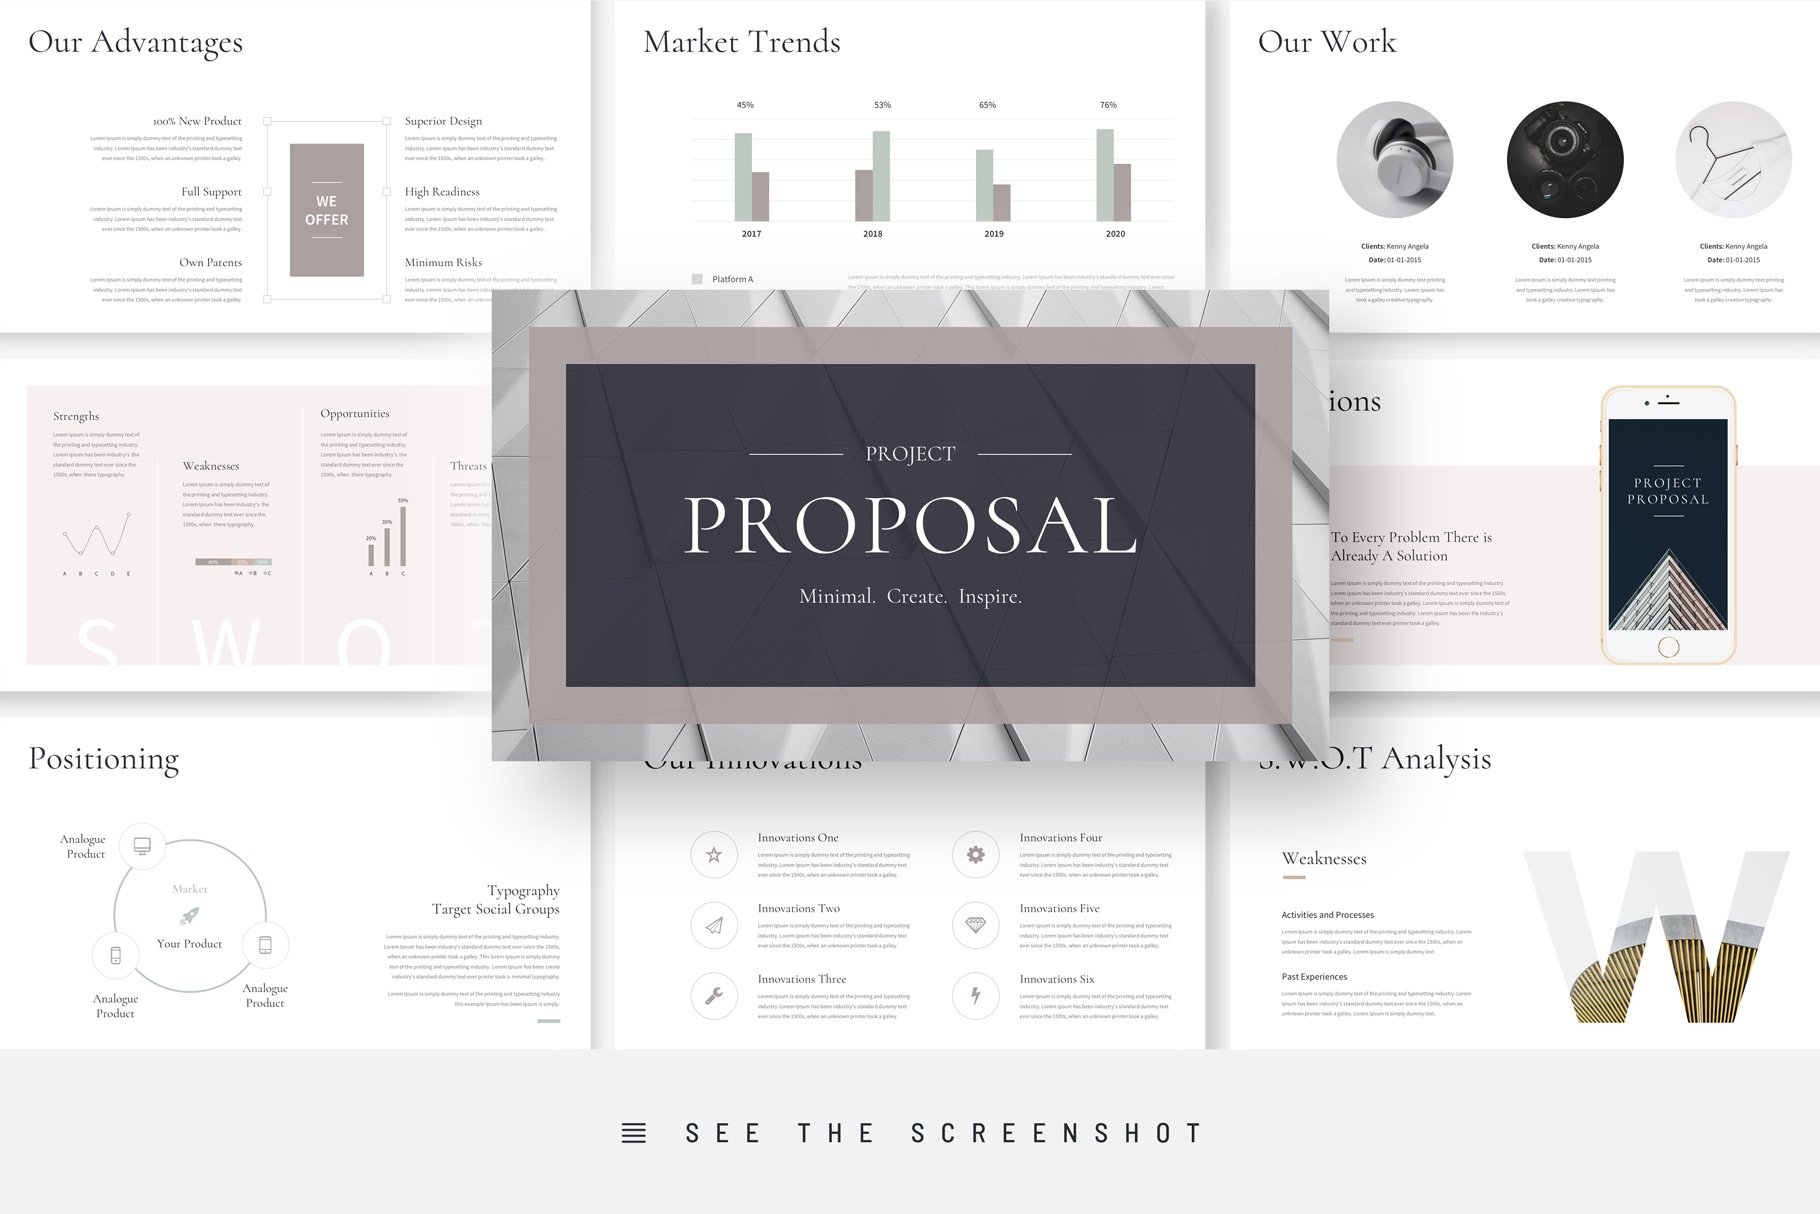 Project Proposal Keynote Template cover image.